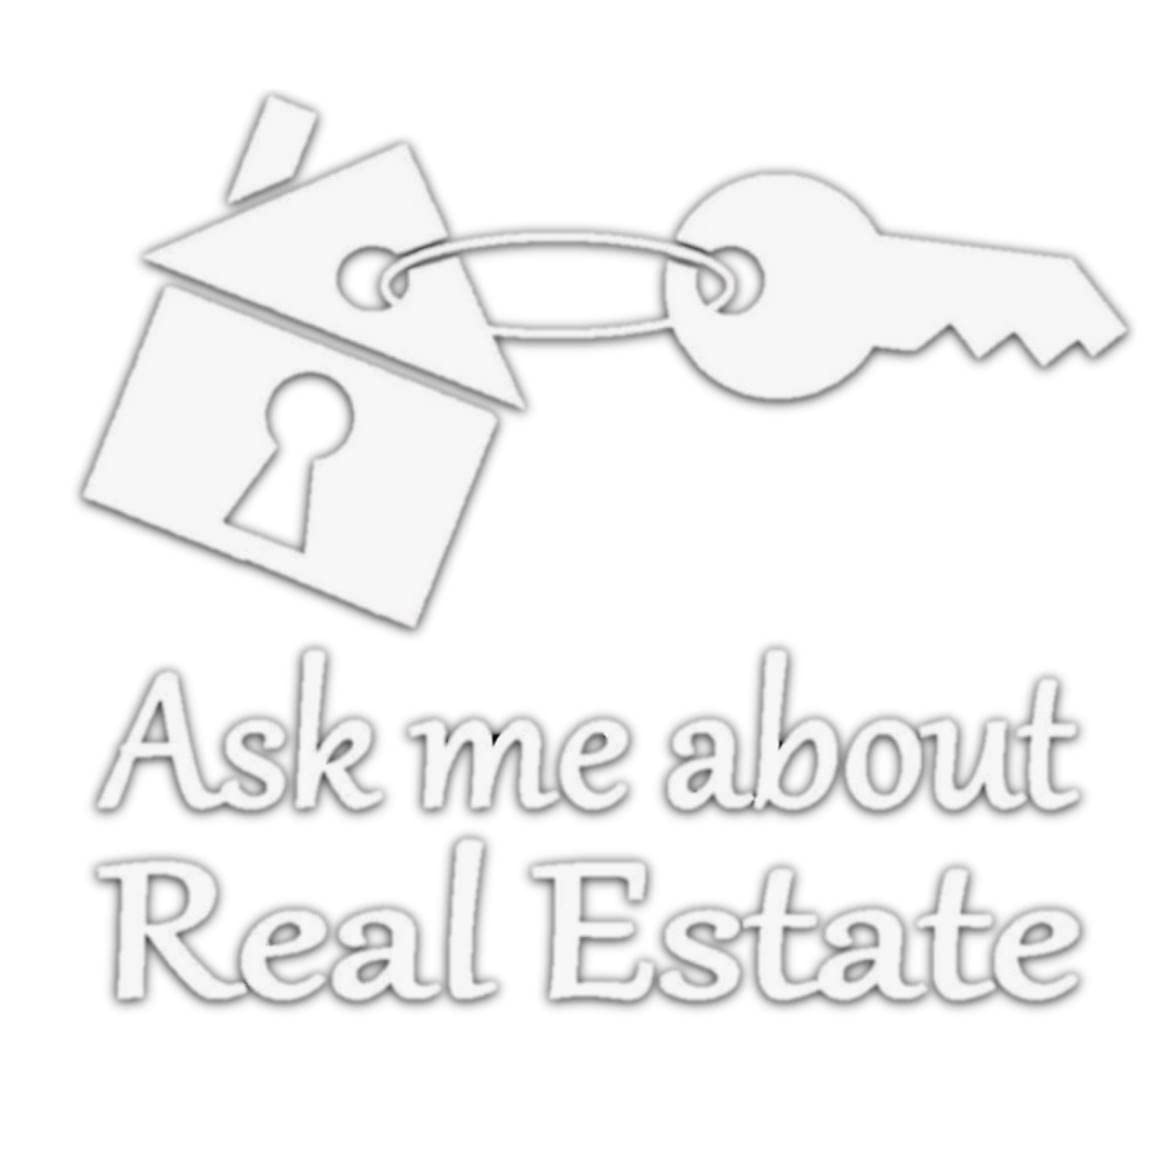 Ask Me About Real Estate Sticker TP 1192 6